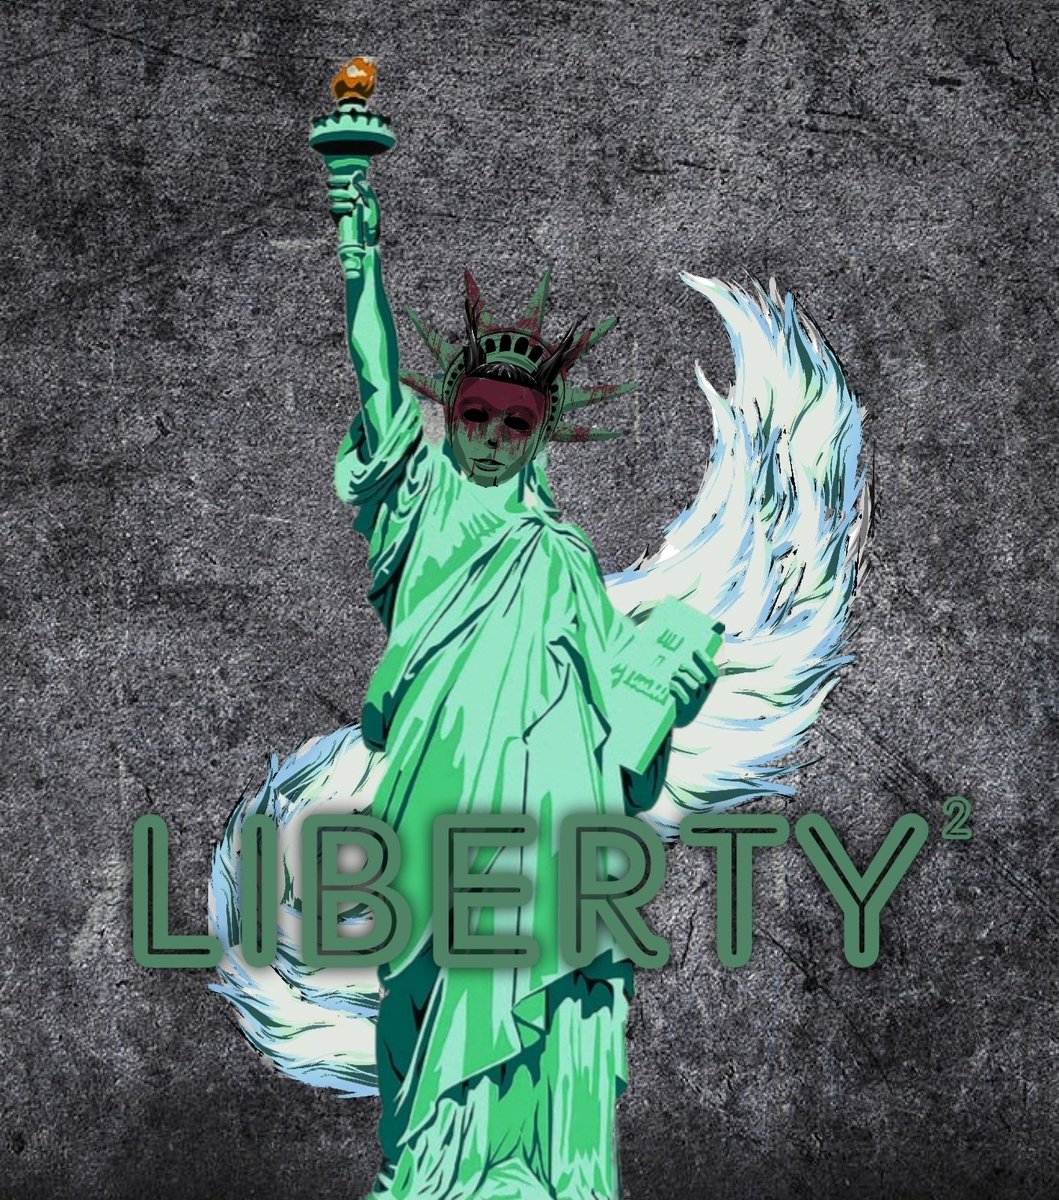 4xLiberty&Justice4All=REKT
Give me #Liberty or give me #Death
Took the Liberty to Have a #SocialSunday. #LFG #Retweet this Ya #Fudders. Show some #love or #hate. #idc just #click something U² #Degens. @LibertySquareHQ vibes!
Don't be a #square, be a #squirrel.